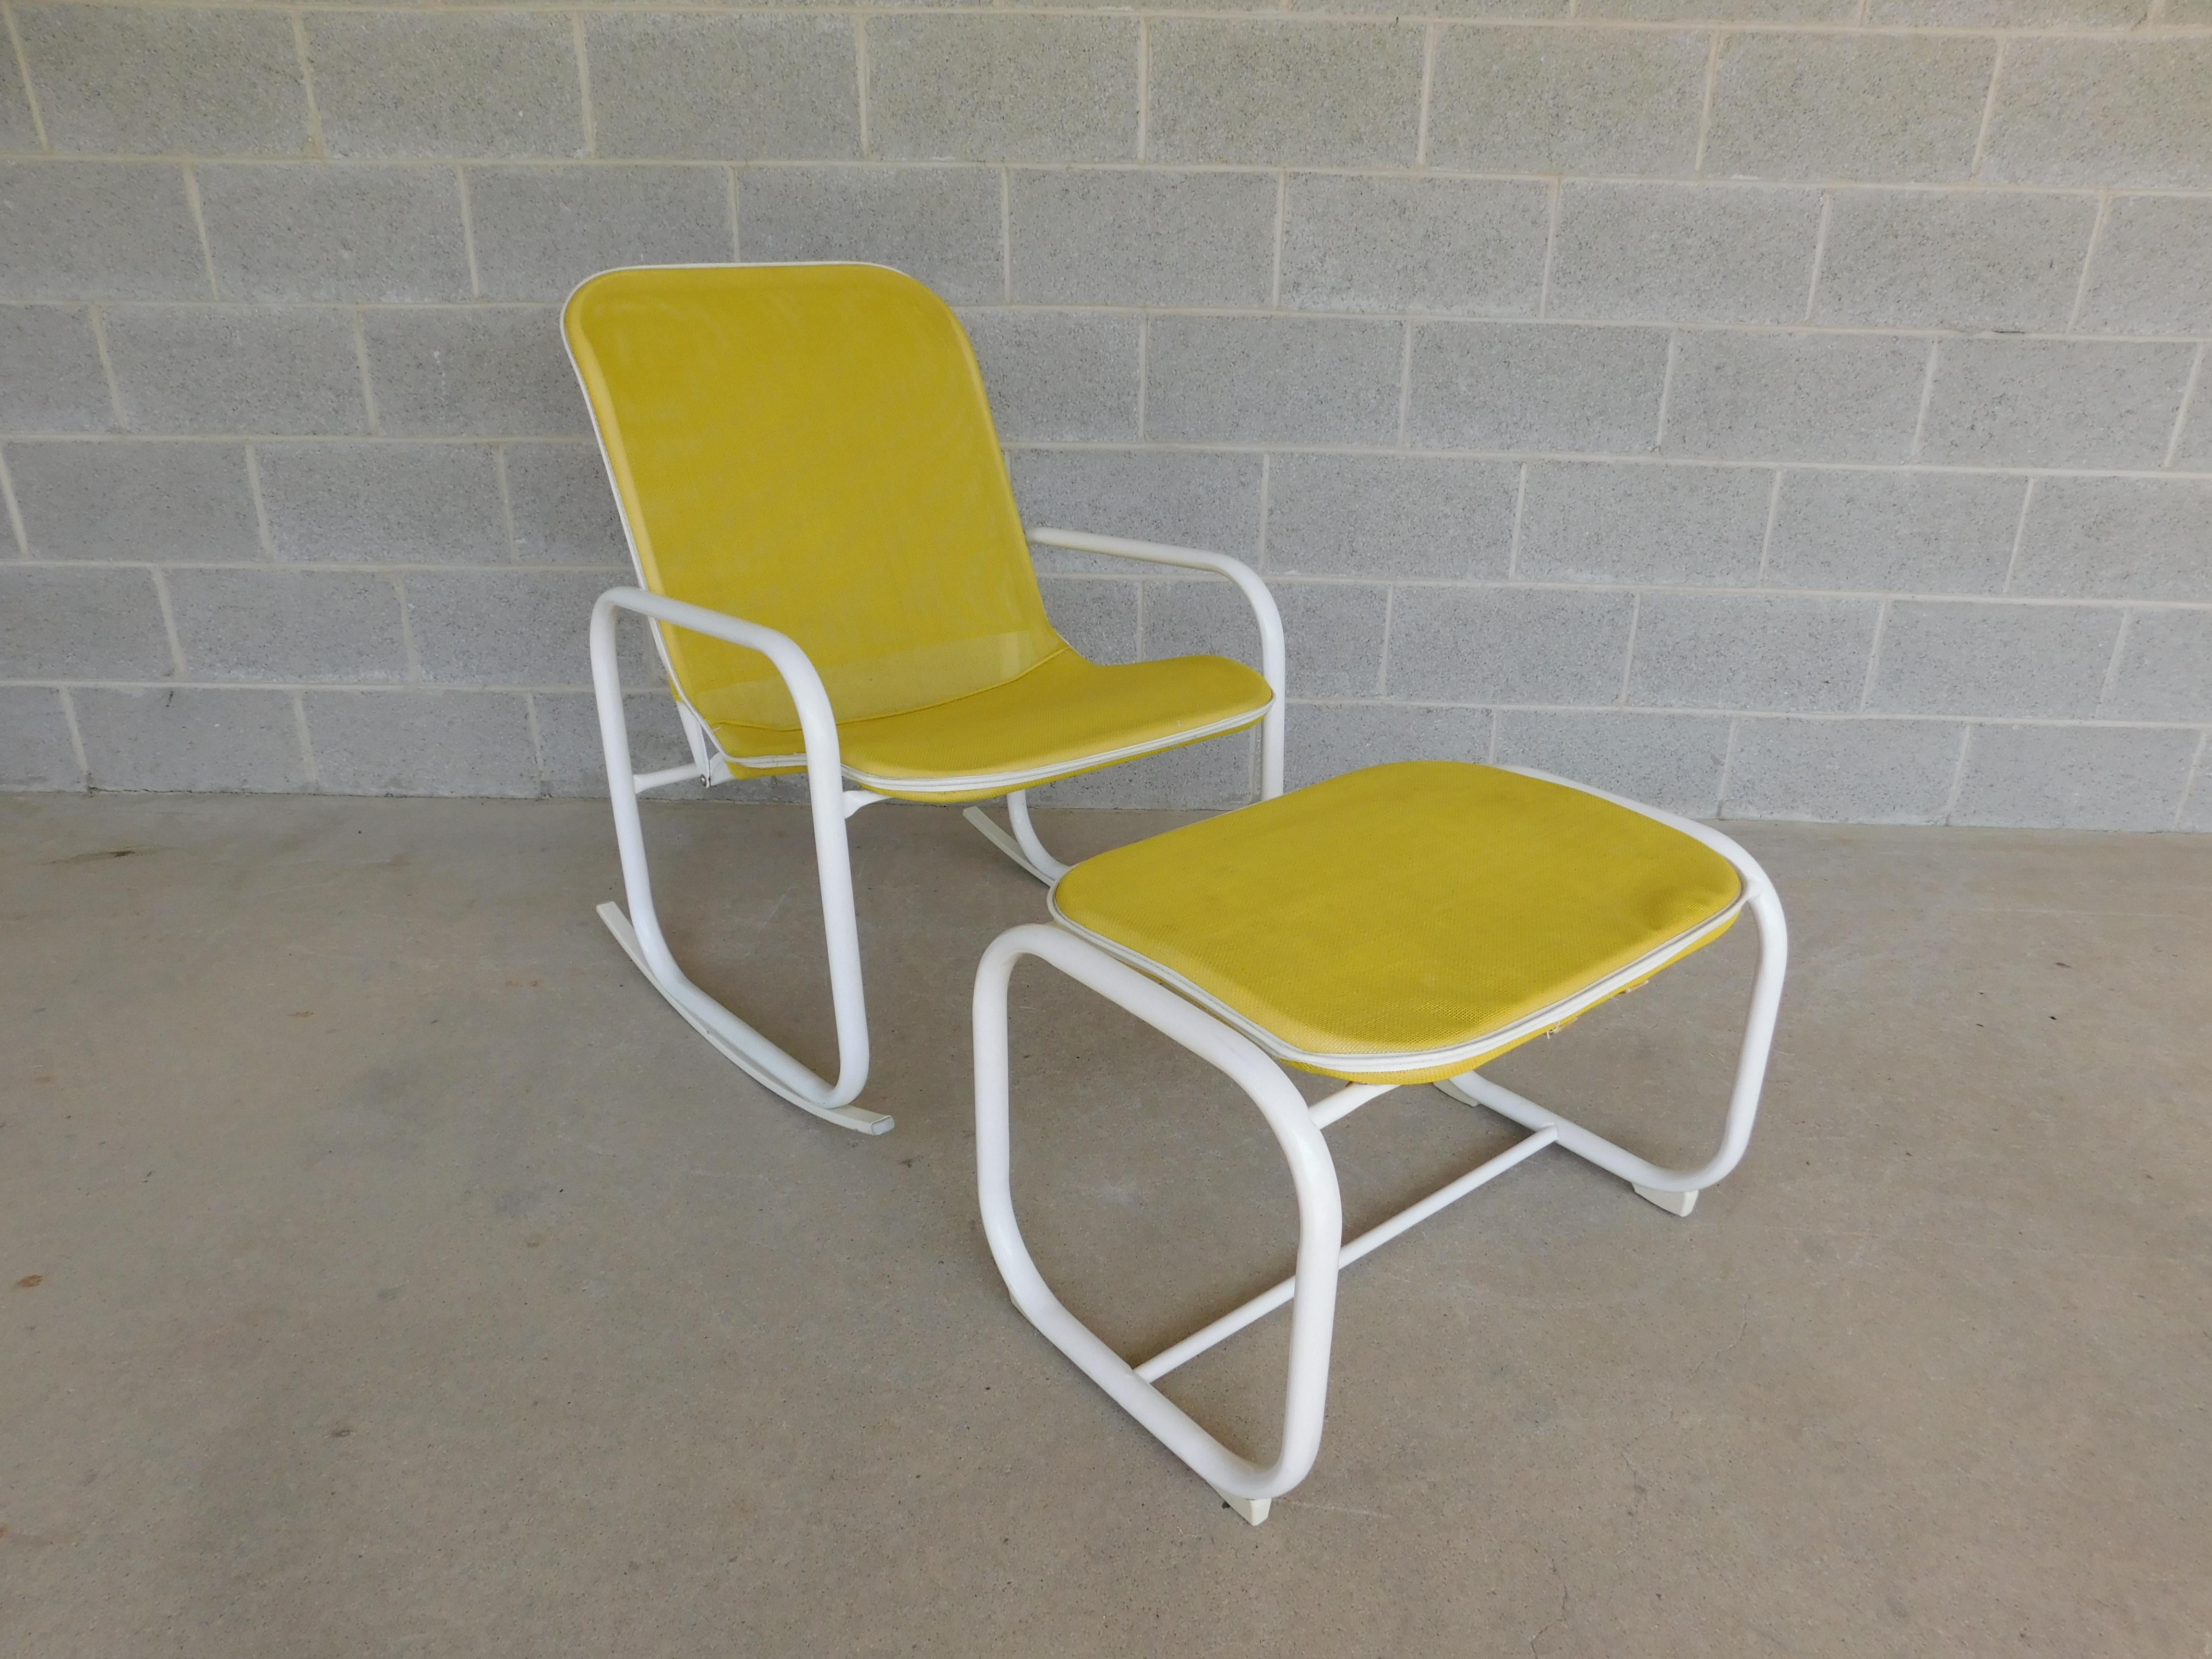 Features Quality Crafted, White Aluminum Base, All Weather Mesh Synthetic Material for Chair & Foot Stool in Lemon Drop Yellow Color

Very Good Condition, original finish

Chairs Back Height 35